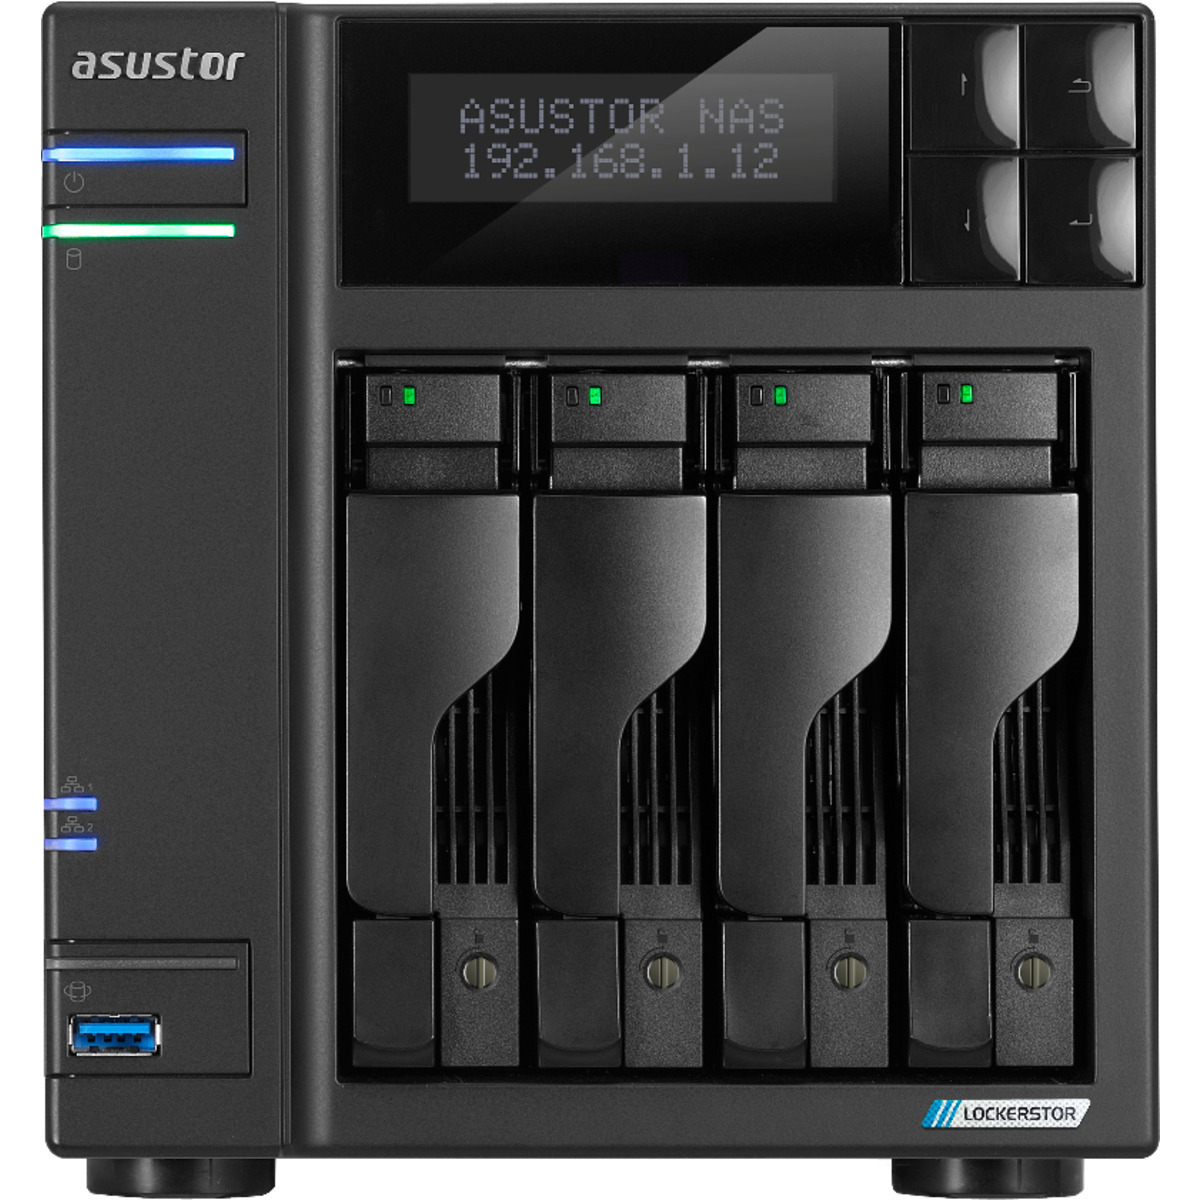 ASUSTOR LOCKERSTOR 4 Gen2 AS6704T 16tb 4-Bay Desktop Multimedia / Power User / Business NAS - Network Attached Storage Device 4x4tb Seagate IronWolf ST4000VN006 3.5 5400rpm SATA 6Gb/s HDD NAS Class Drives Installed - Burn-In Tested - FREE RAM UPGRADE LOCKERSTOR 4 Gen2 AS6704T